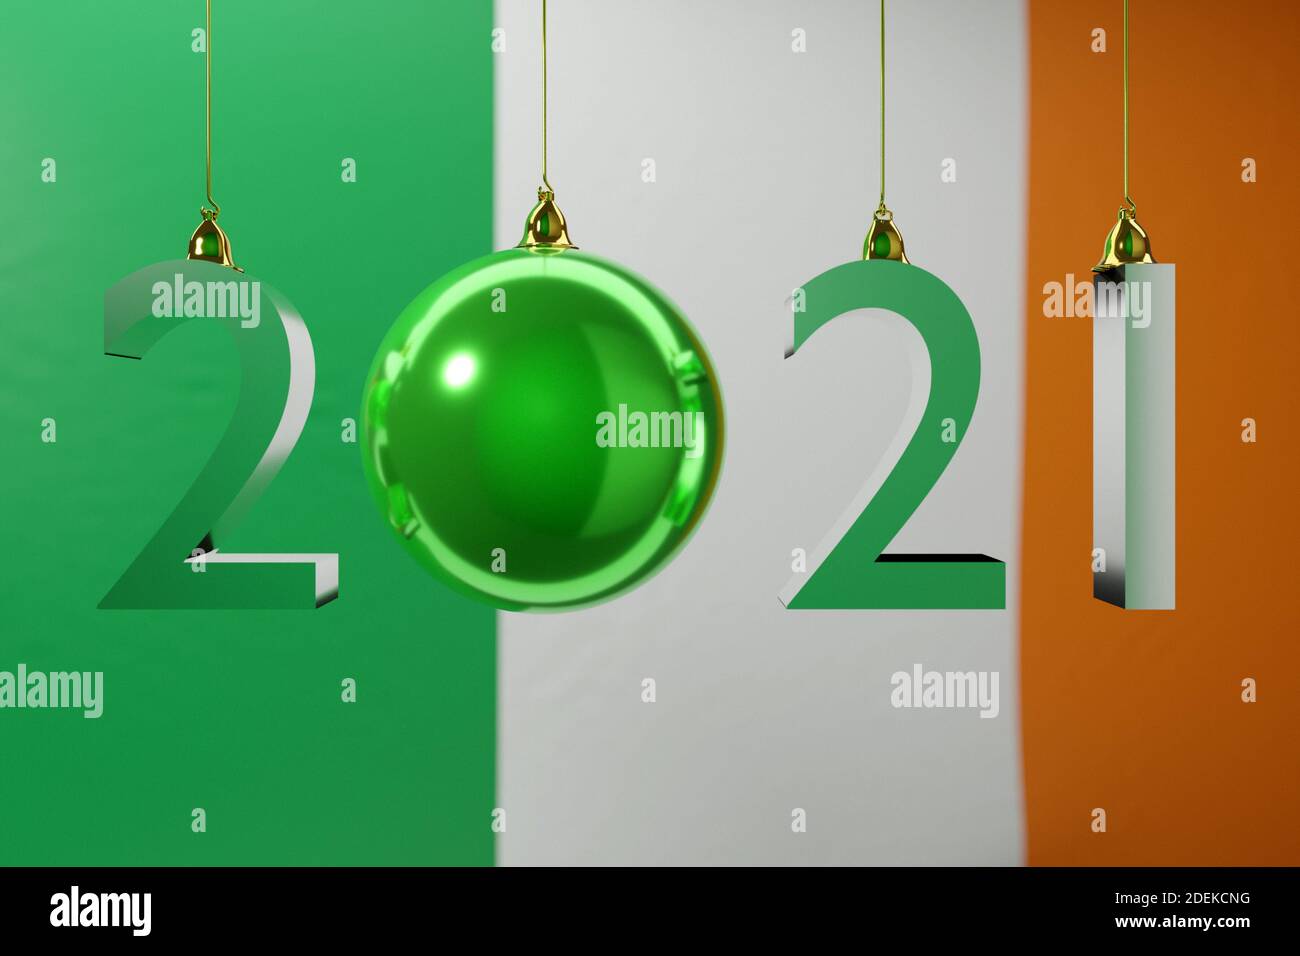 3D illustration  2021 happy new year against the background of the national  flag of Ireland, 2021 white letter . Illustration of the symbol of the ne Stock Photo